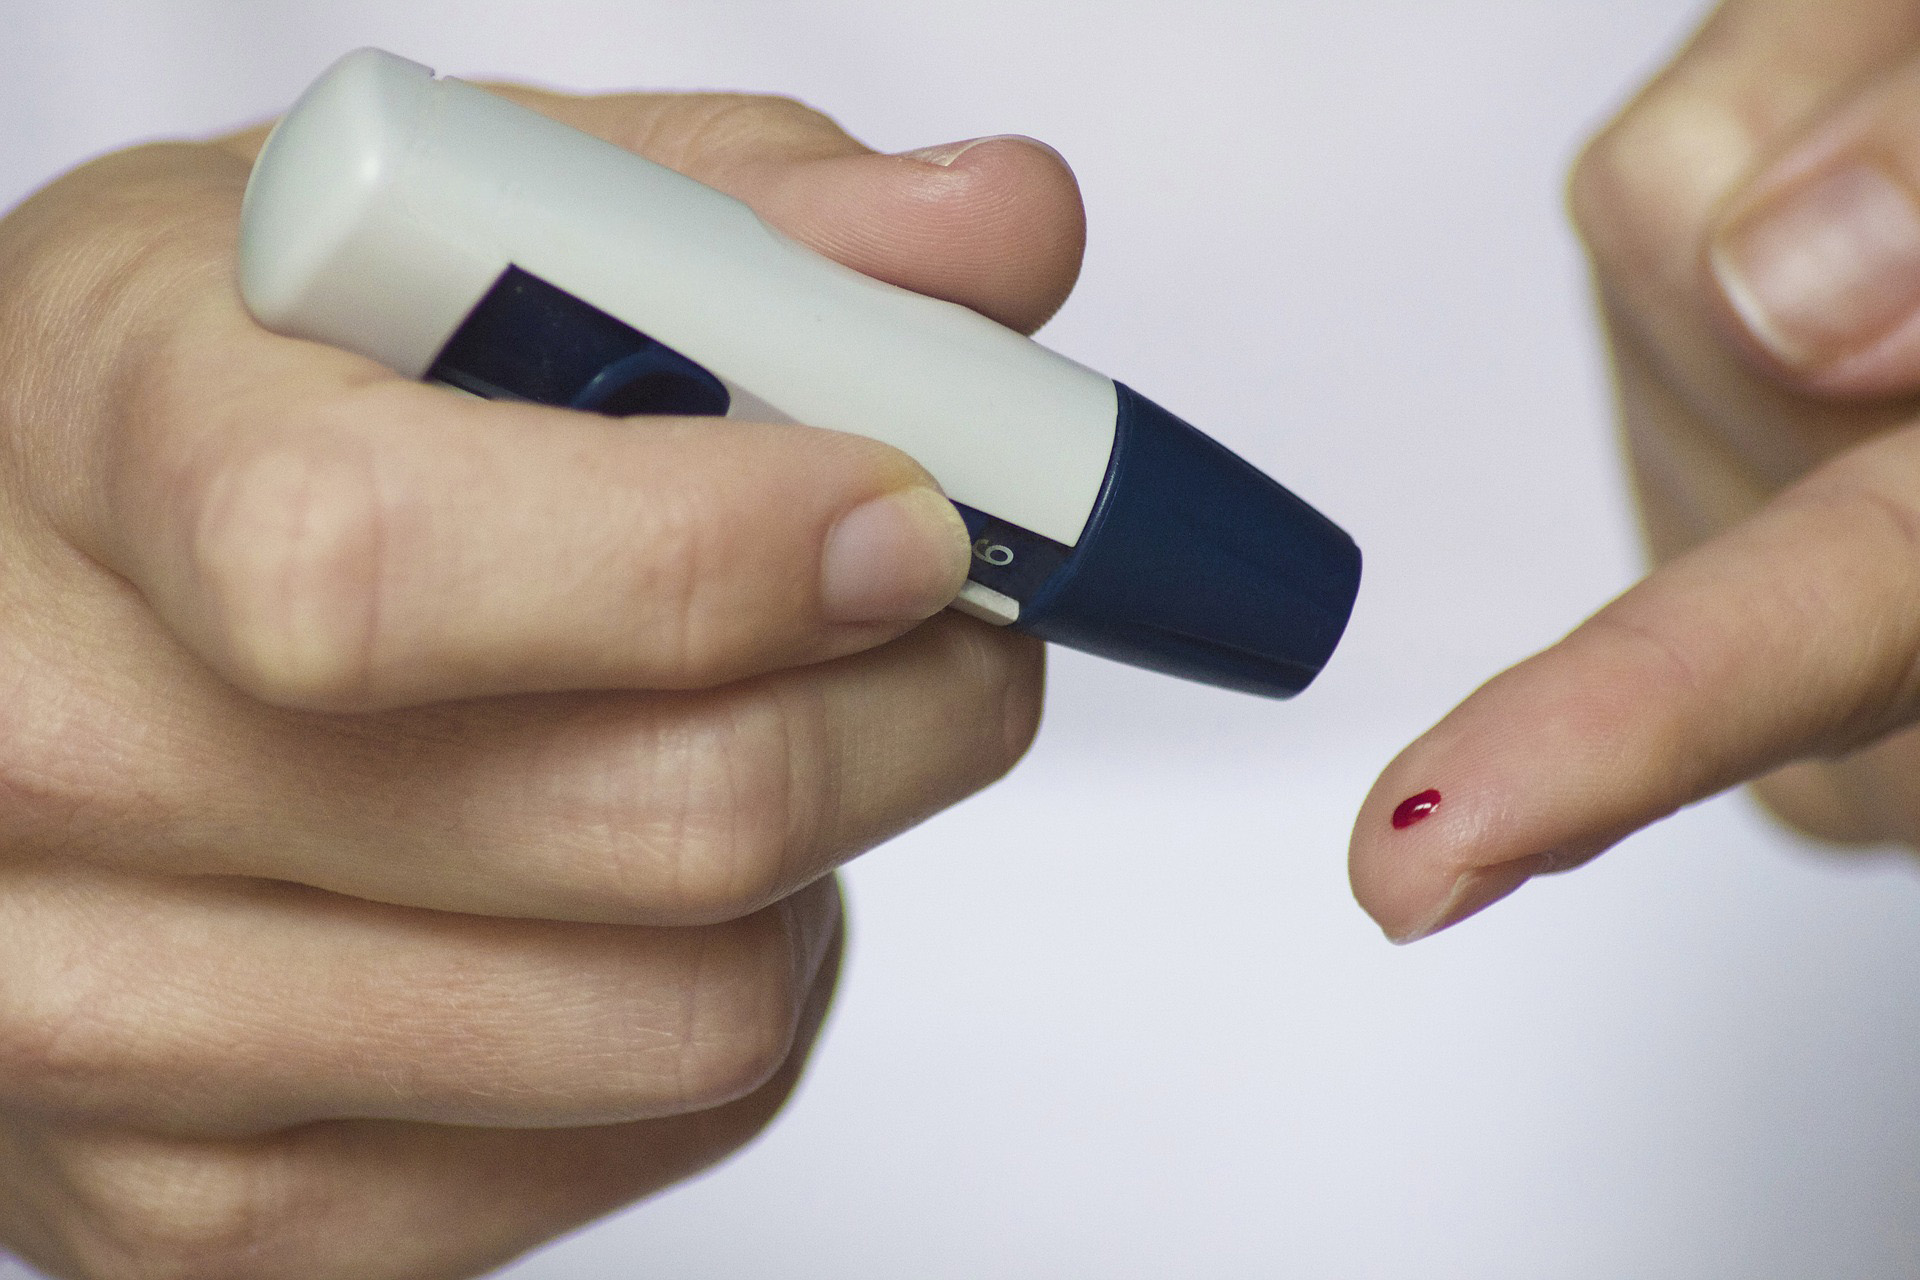 Tips to Prevent Sore Fingertips From Blood Glucose Testing